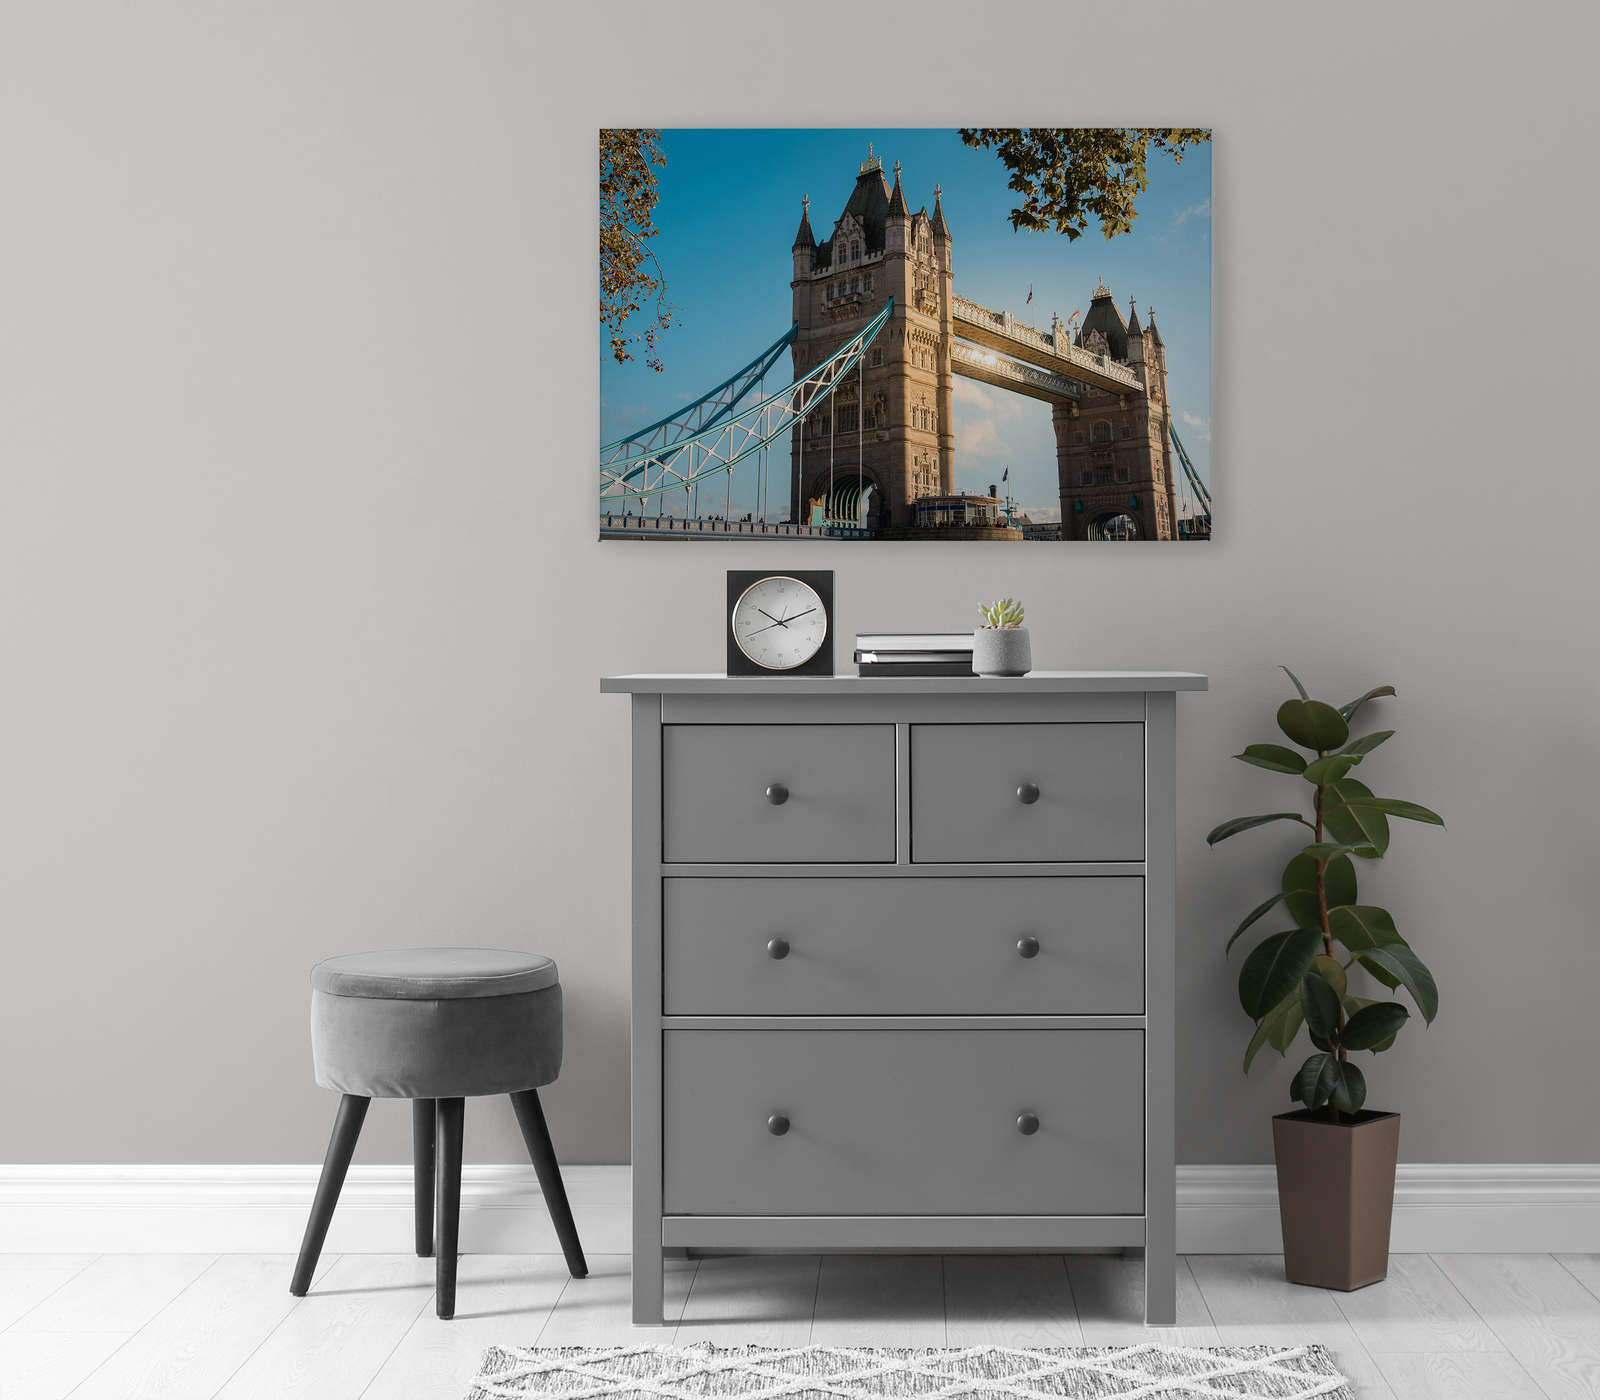             Canvas painting with London Bridge in sunny weather - 0.90 m x 0.60 m
        